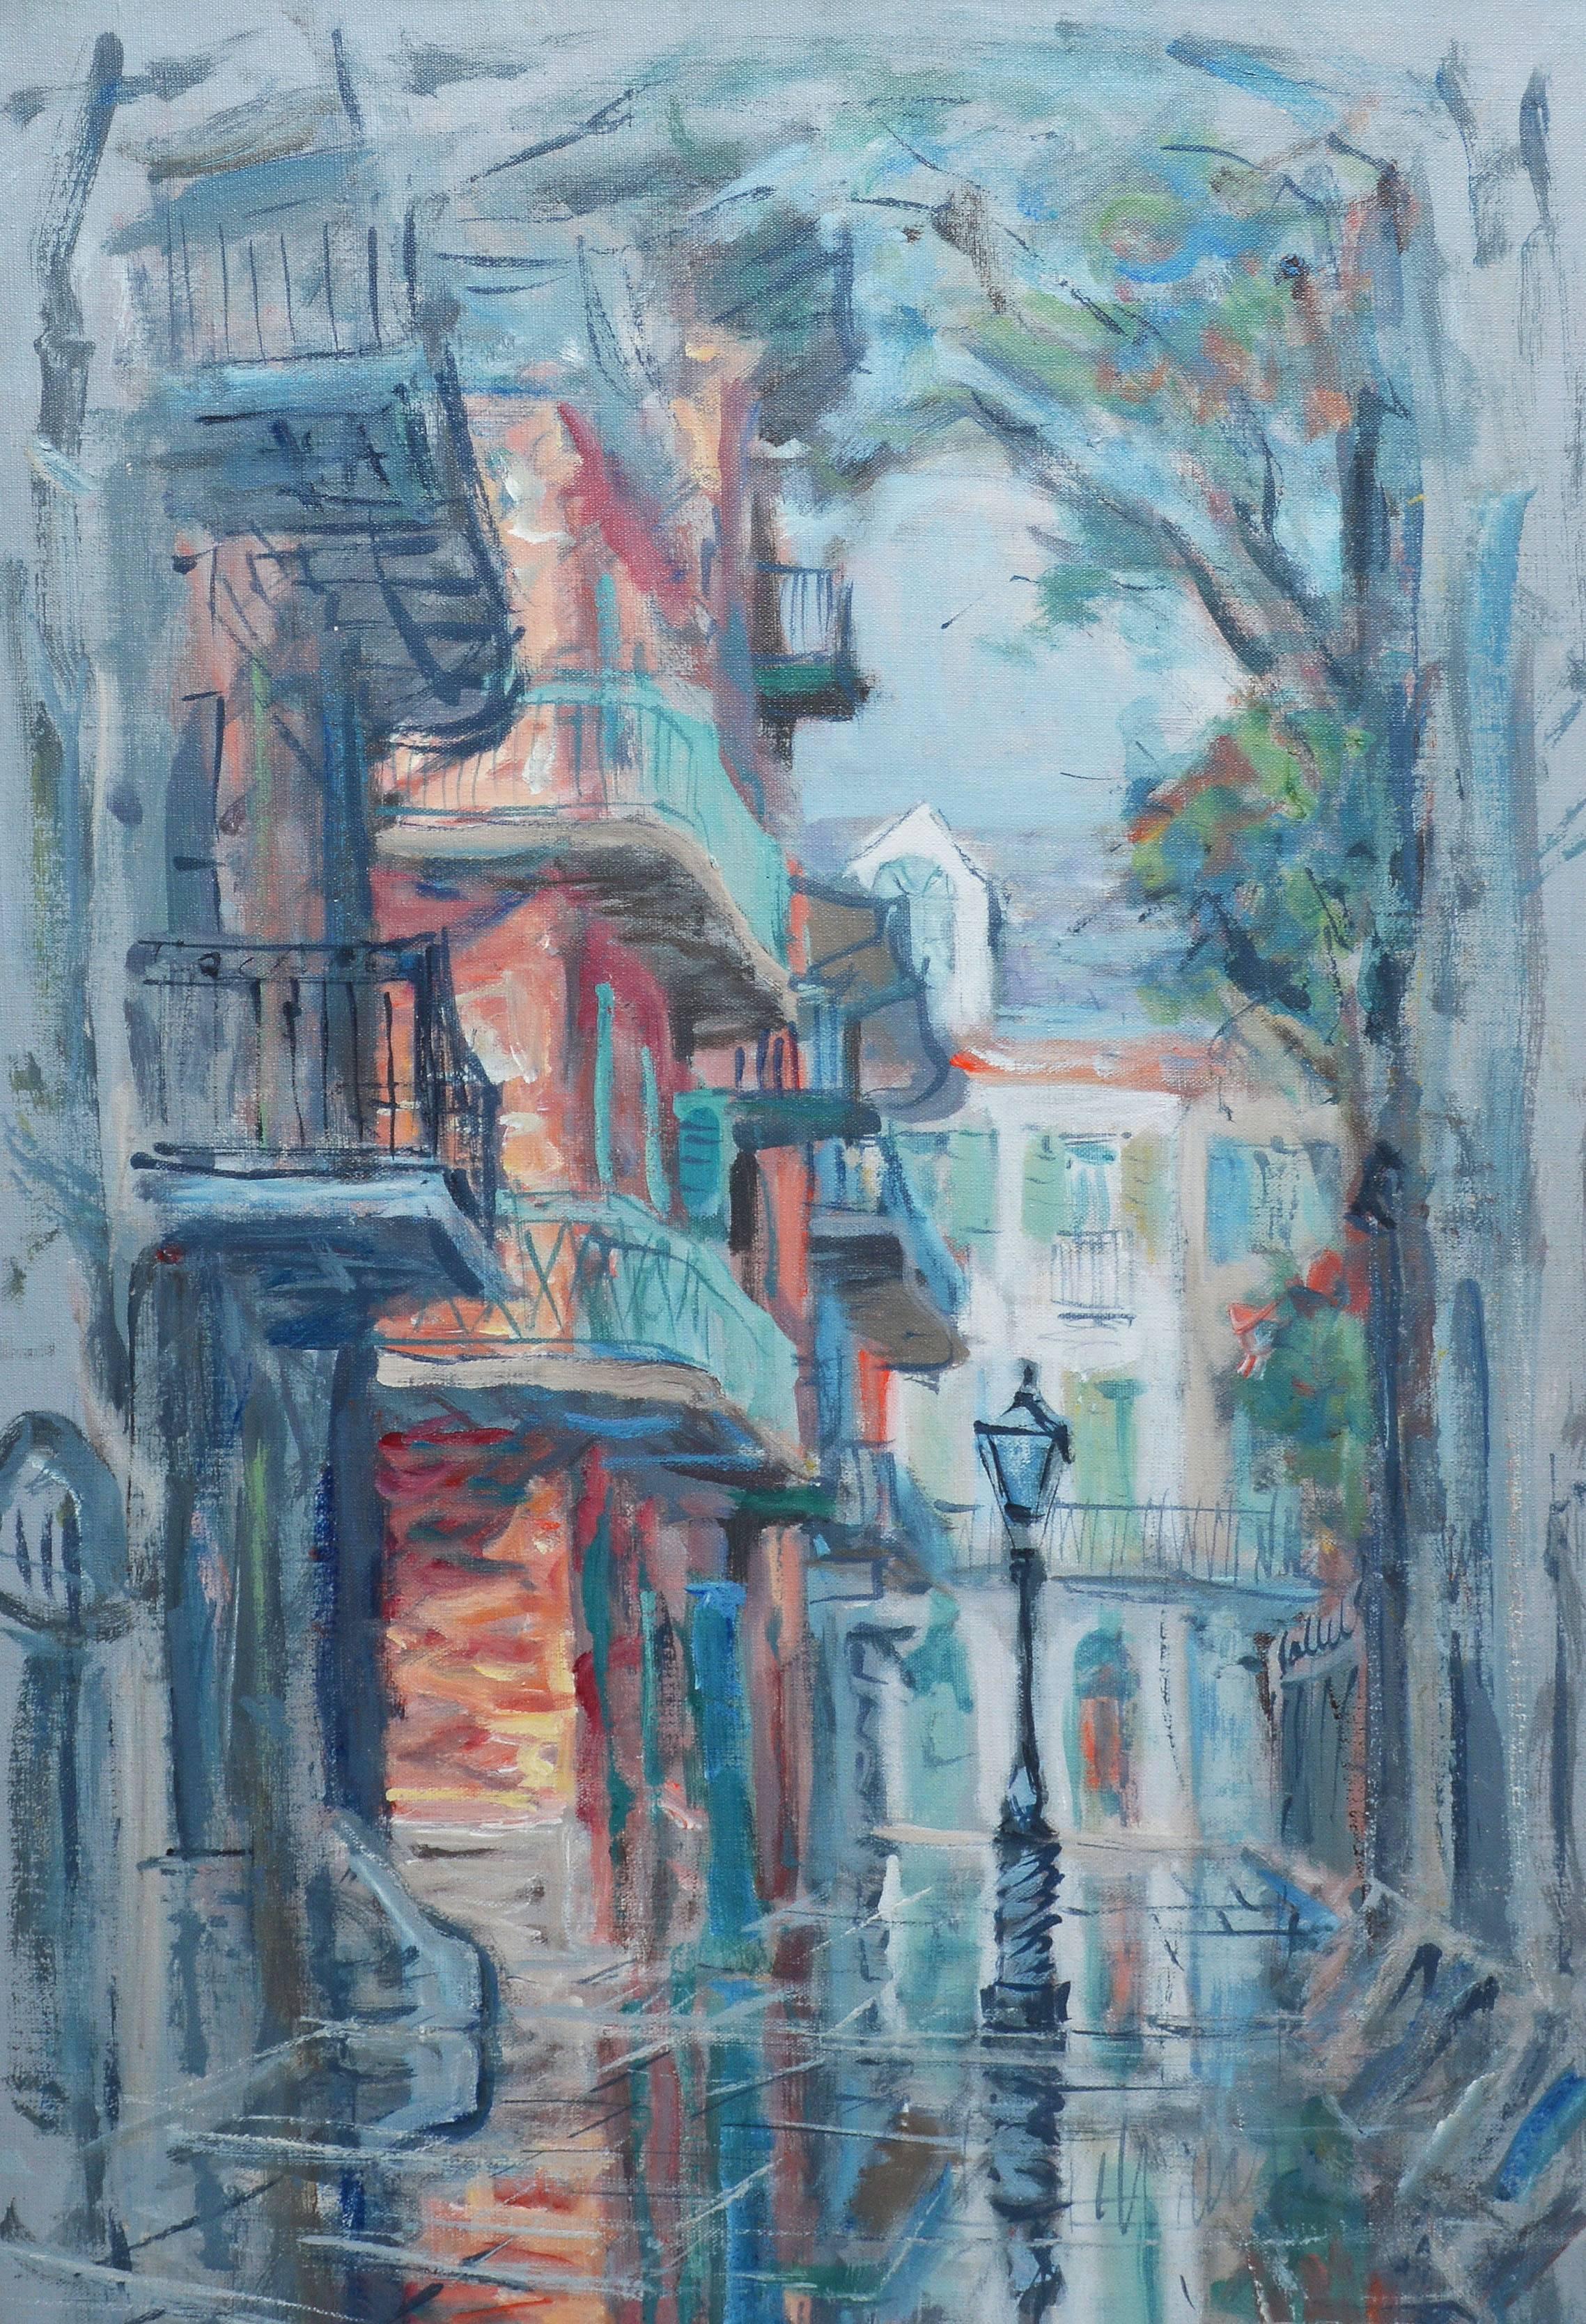 Rainy Day in the French Quarter, New Orleans Louisiana by Richard Hoffman 1